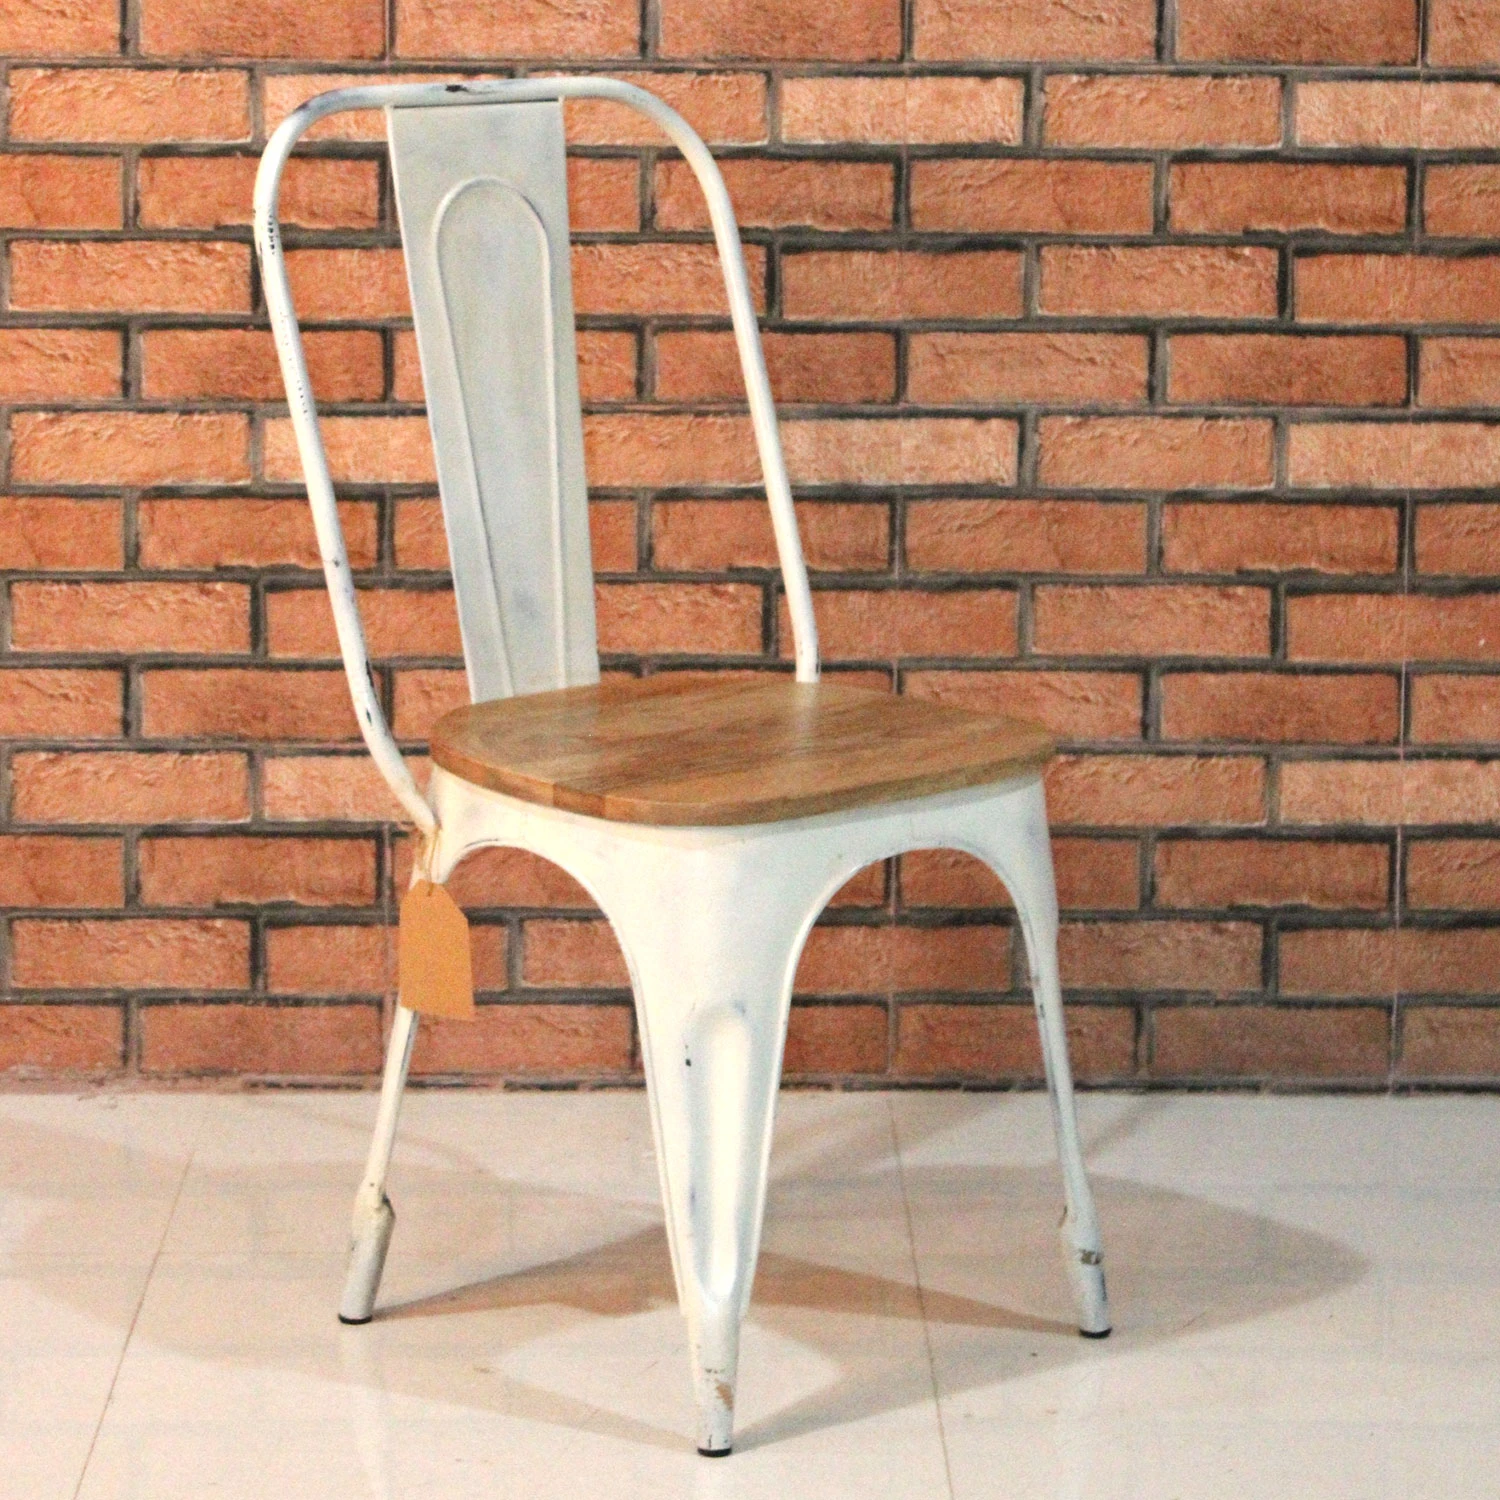 Iron Cello Chair with Wooden Seat - popular handicrafts